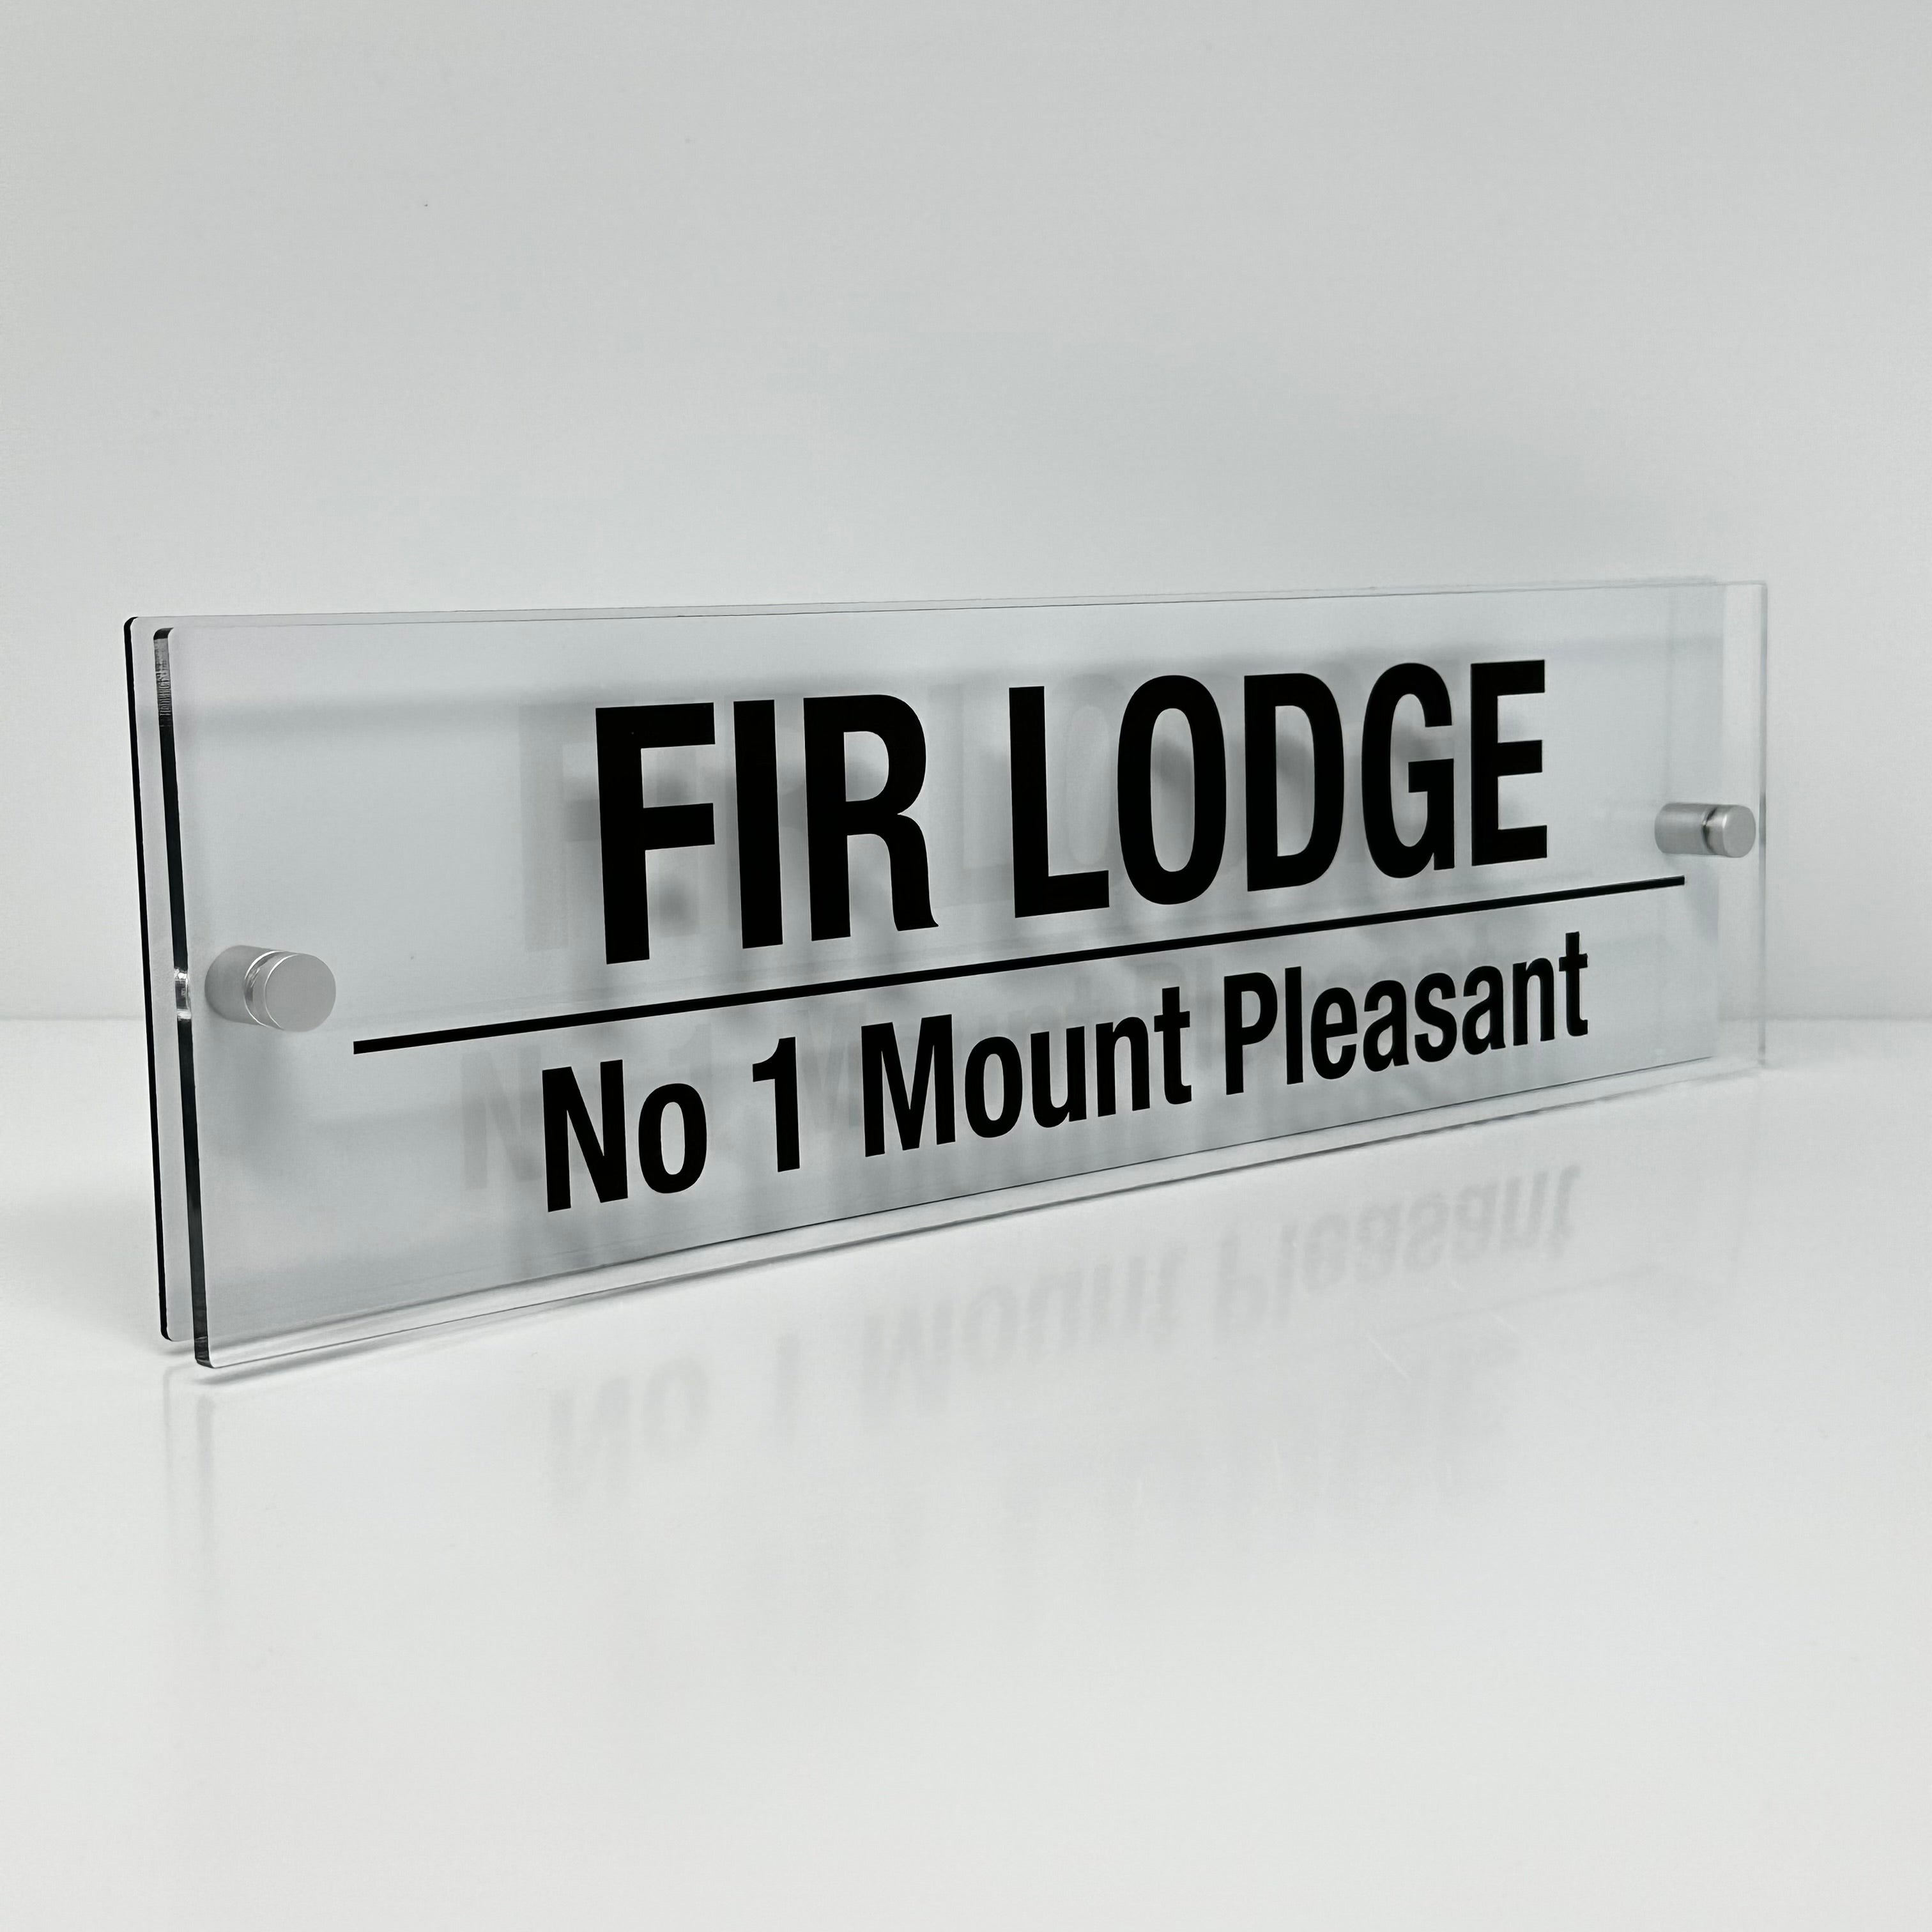 The Fir Lodge Modern House Sign with Perspex Acrylic Front, White Rear Panel and Satin Silver Stand Off Fixings ( Size - 42cm x 12cm )